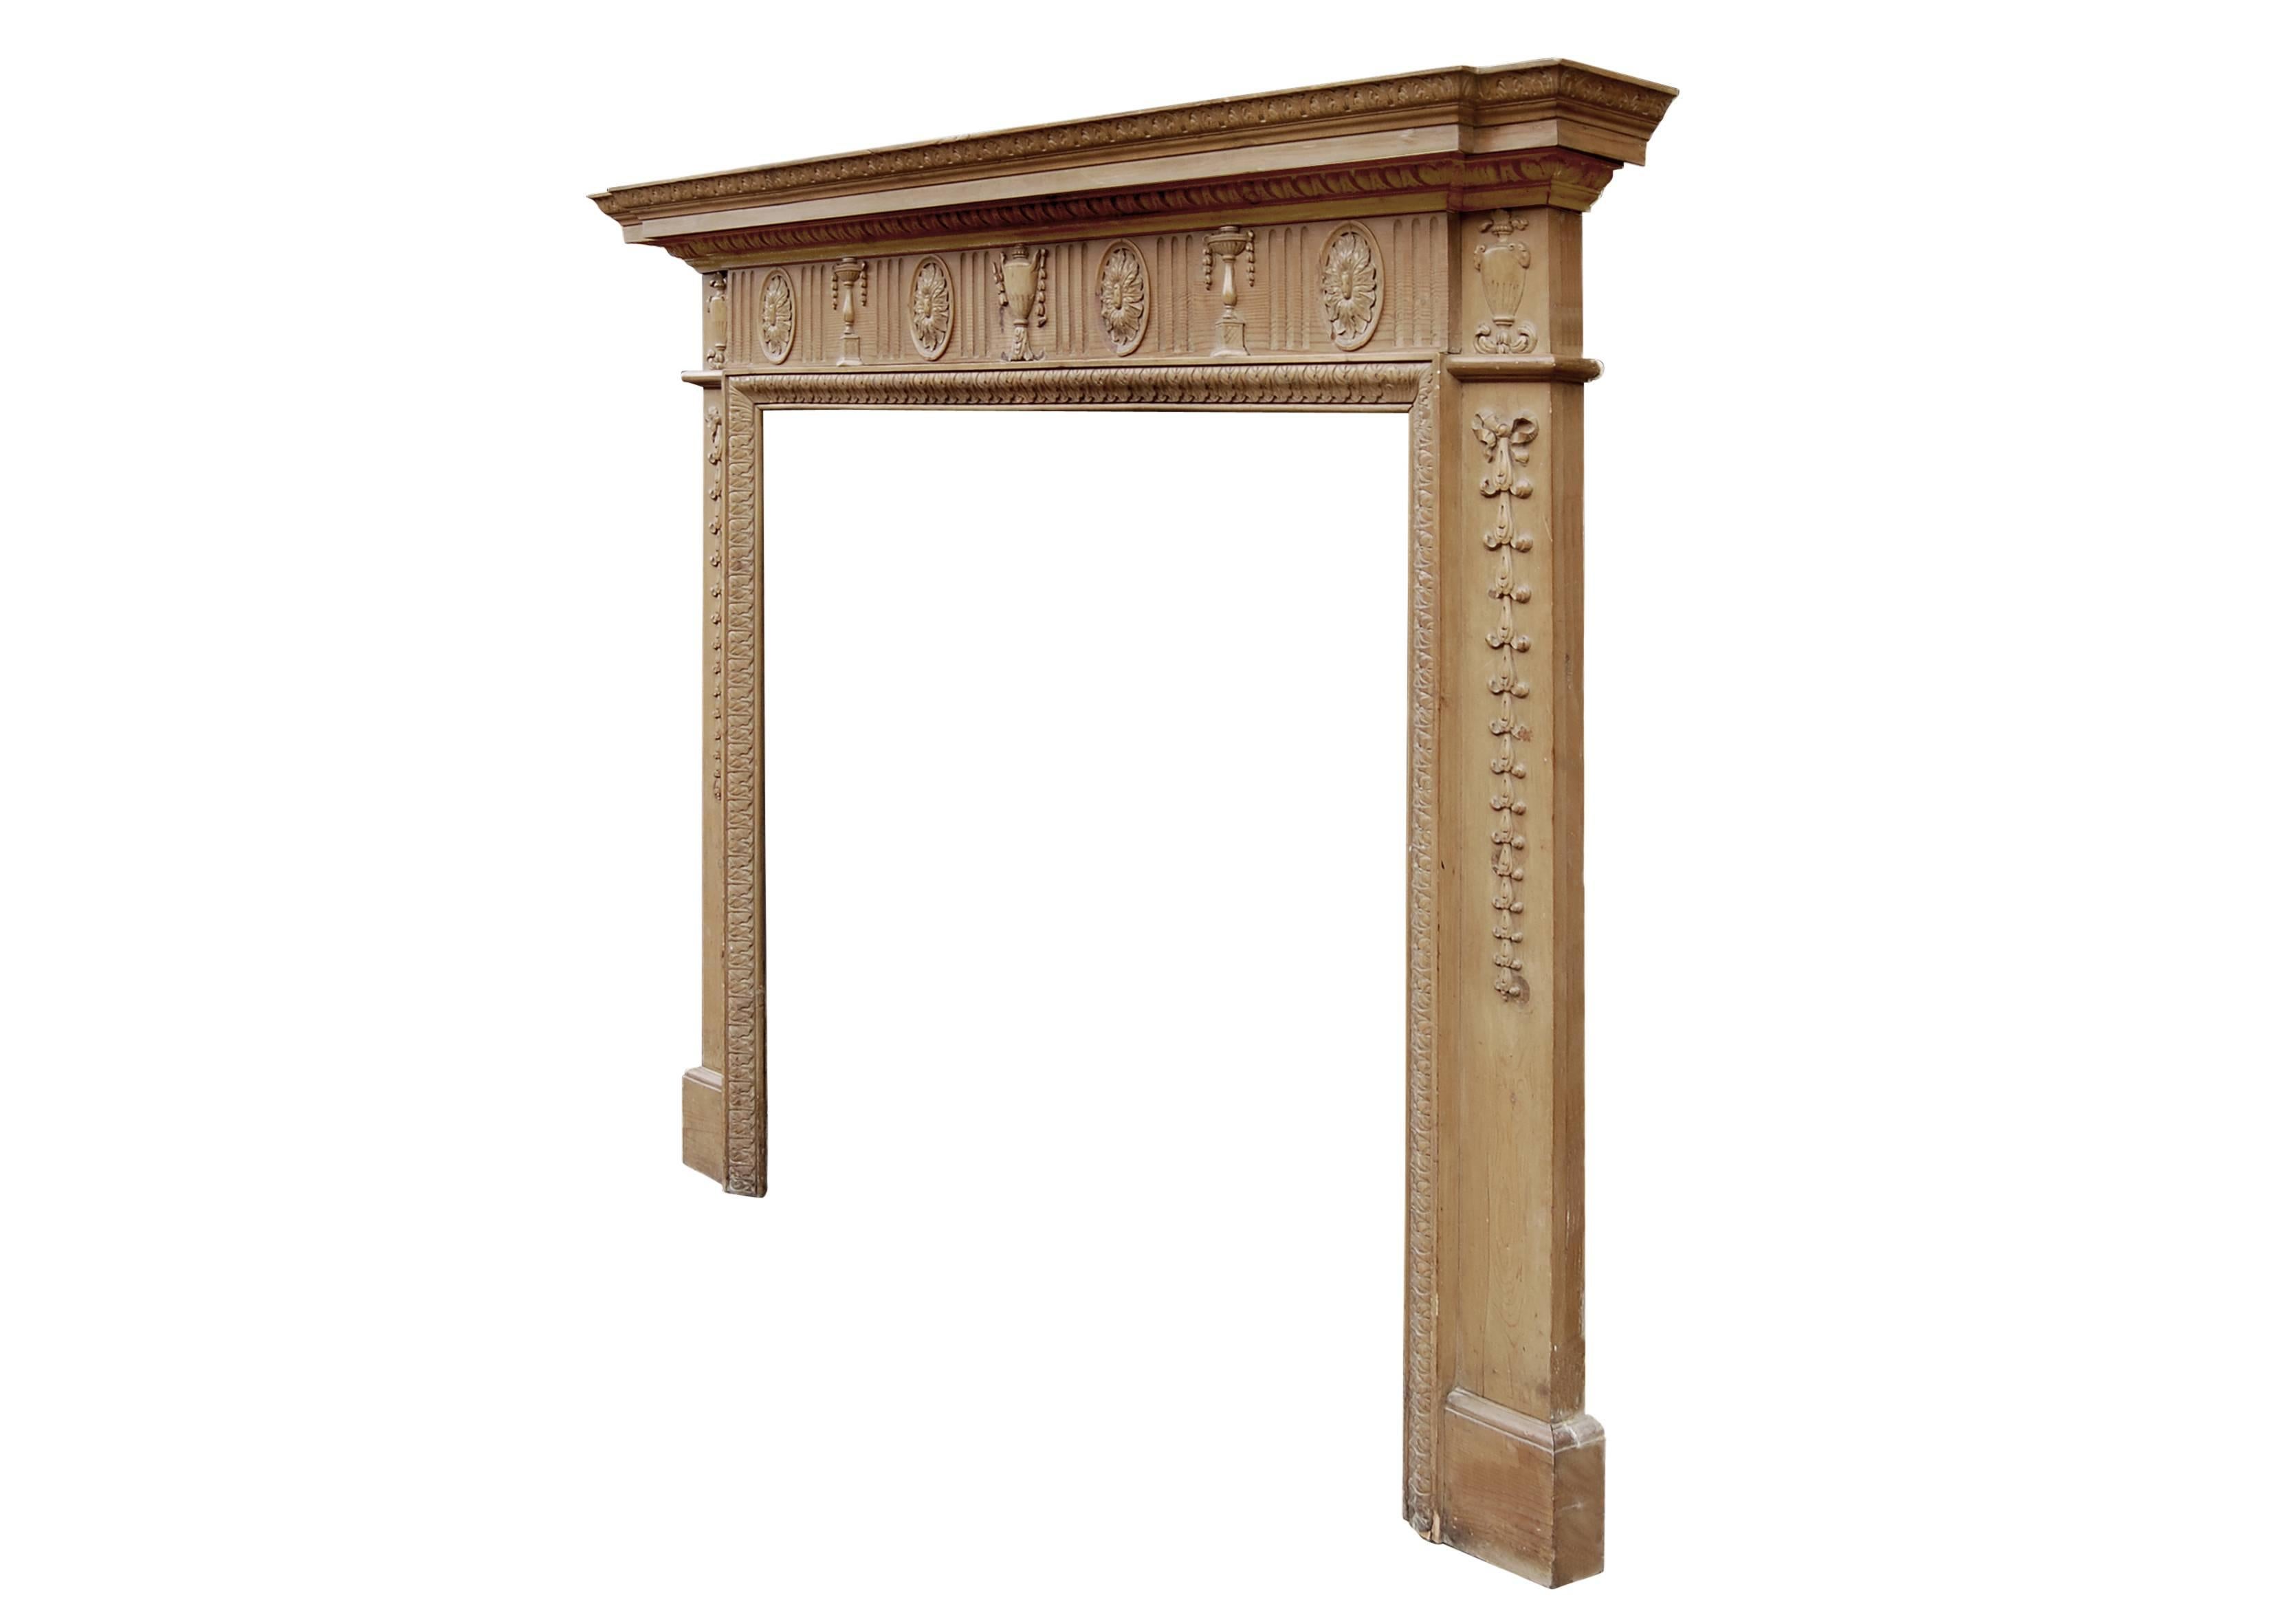 A classical English waxed pine fireplace, the frieze with urns, leaf pateras and flutes, the jambs with bellflower drops and carved leaf leg moulding. Egg and dart and leaf cornice. 20th century.

Measures:
Shelf Width:	1555 mm      	61 1/4